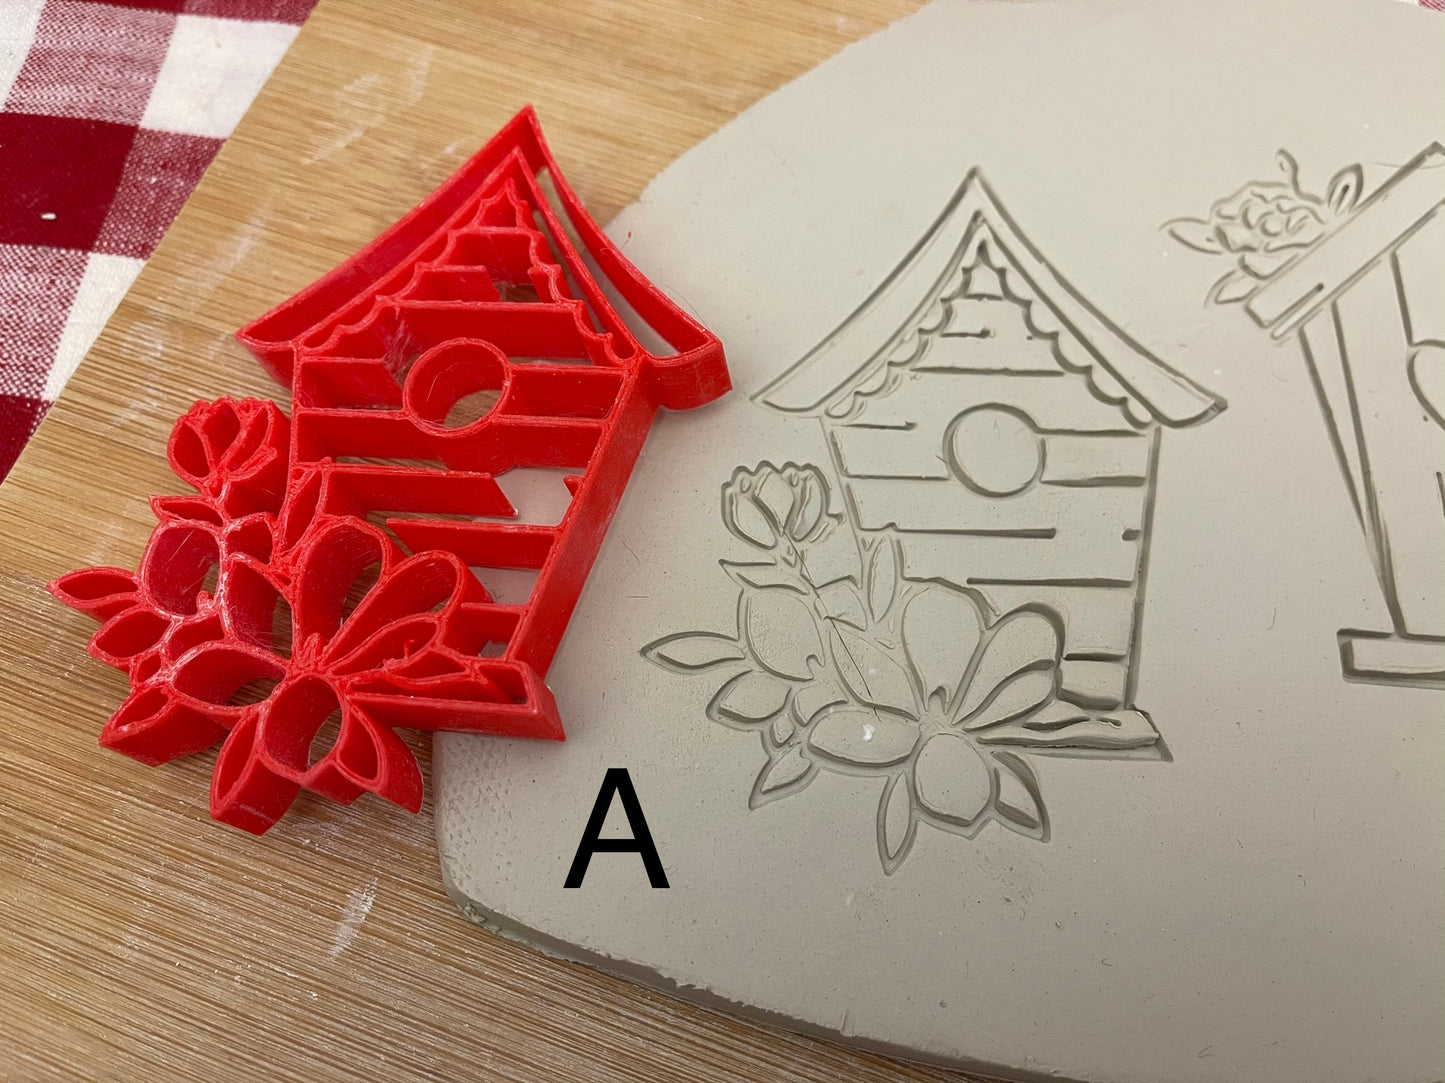 Birdhouse w/ flowers pottery stamp - Each or set, Pottery Tool, plastic 3d printed, multiple sizes